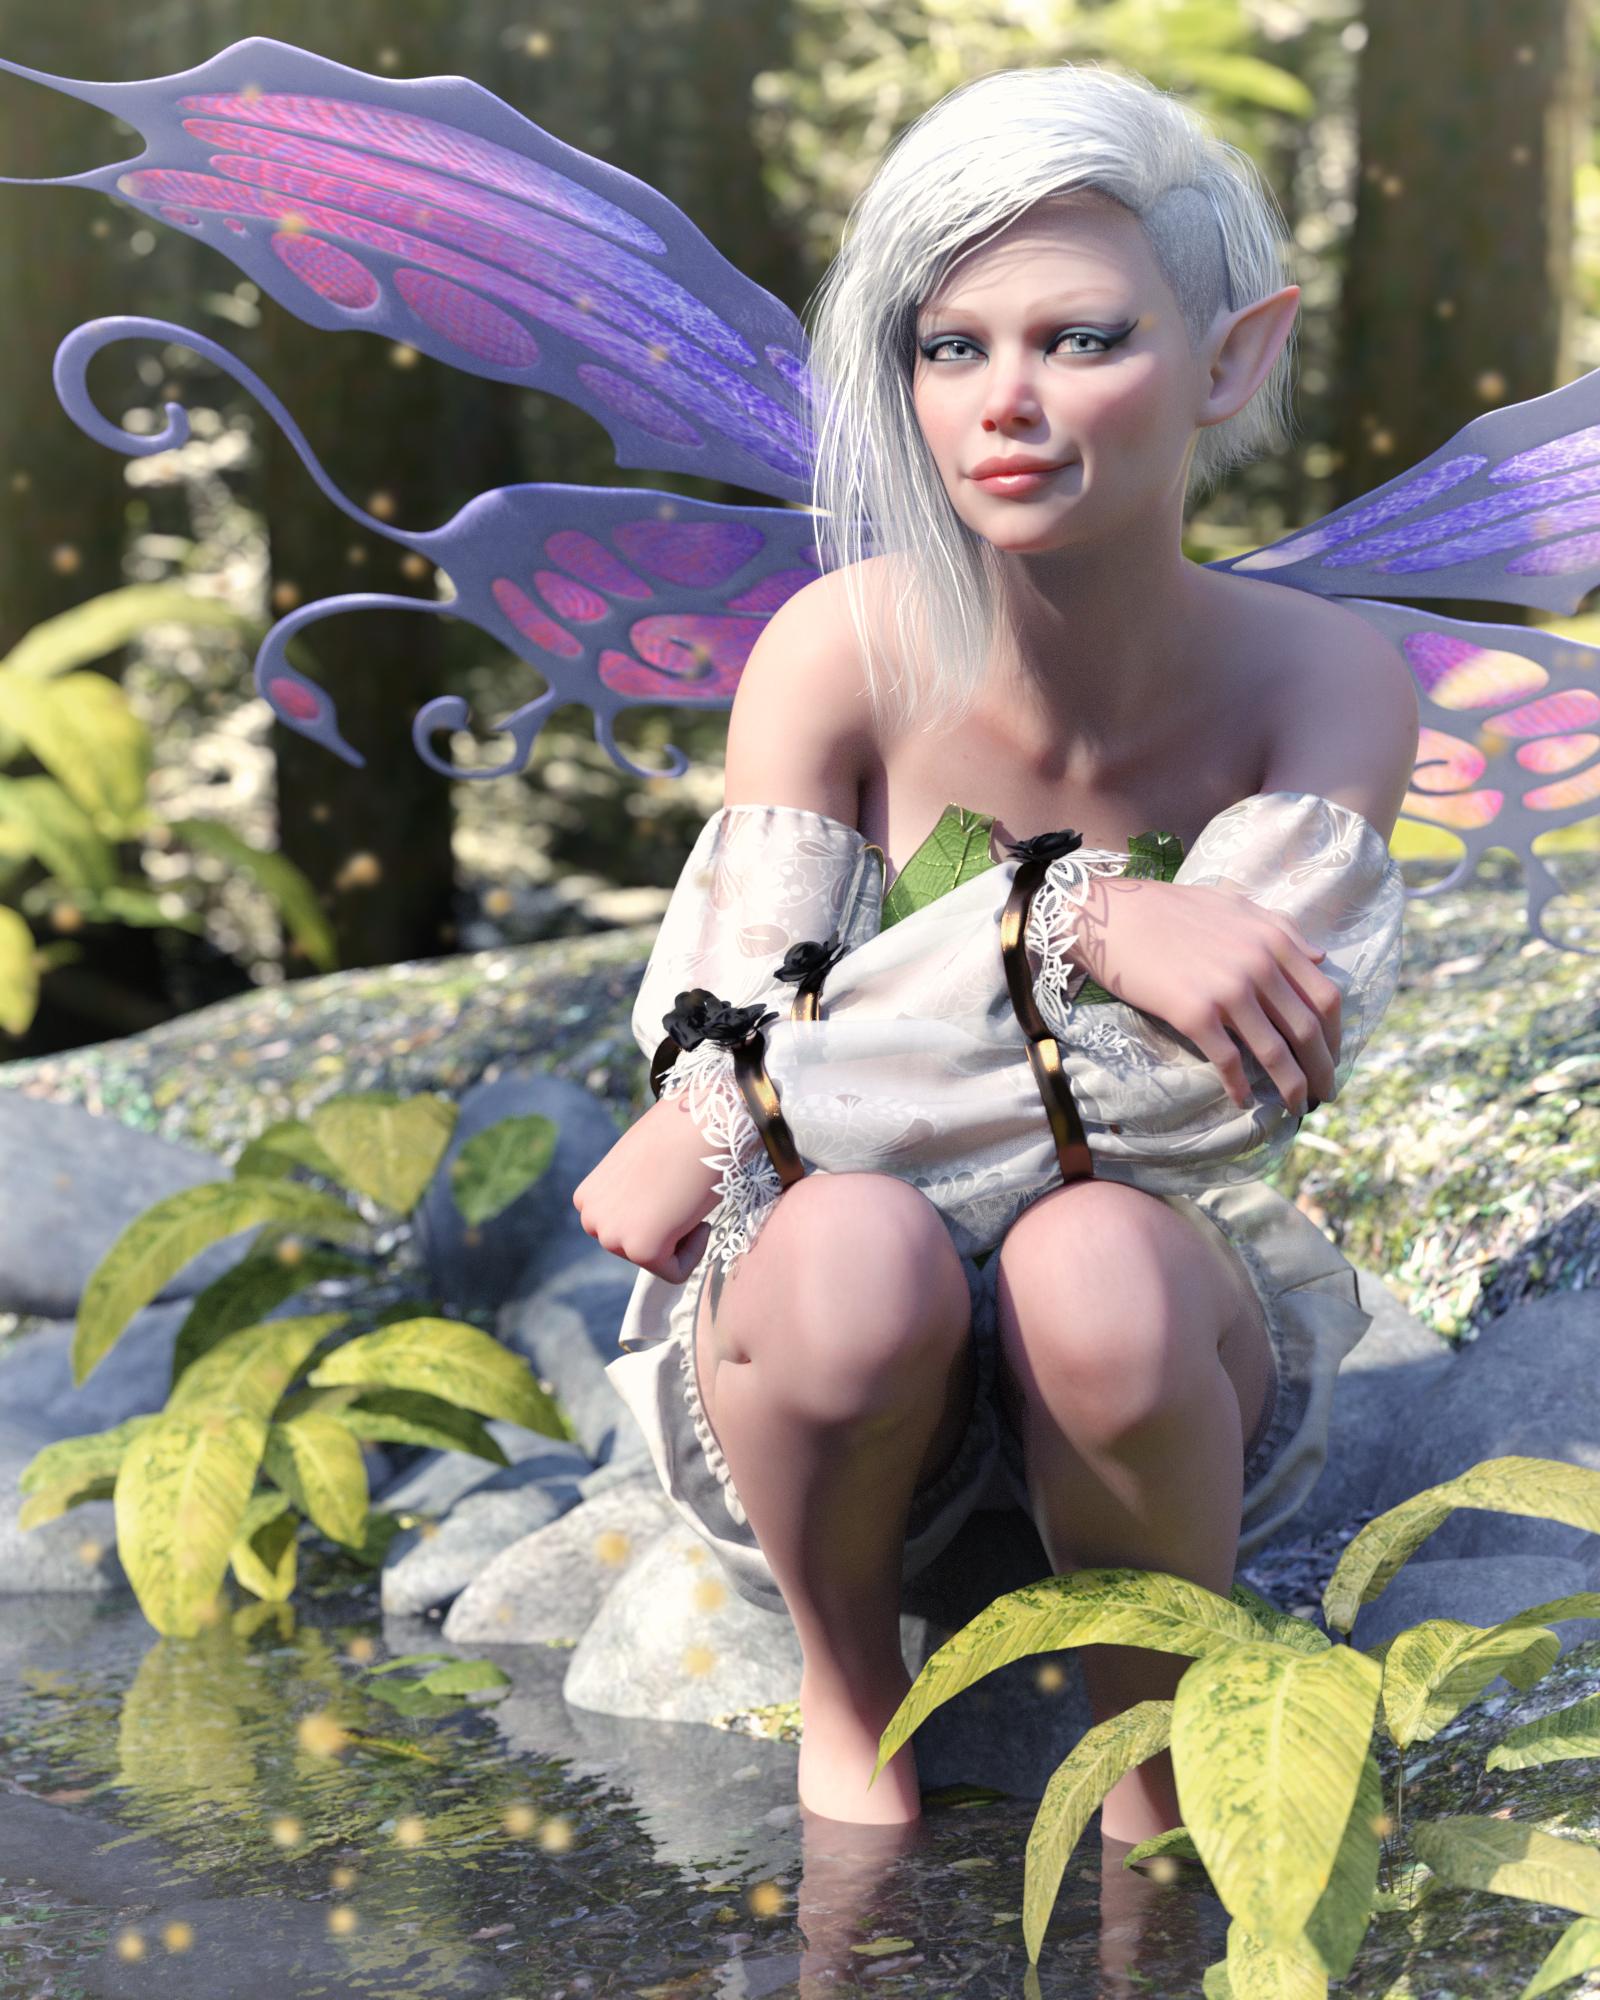 Fairies and elves exist!, by grazitf01